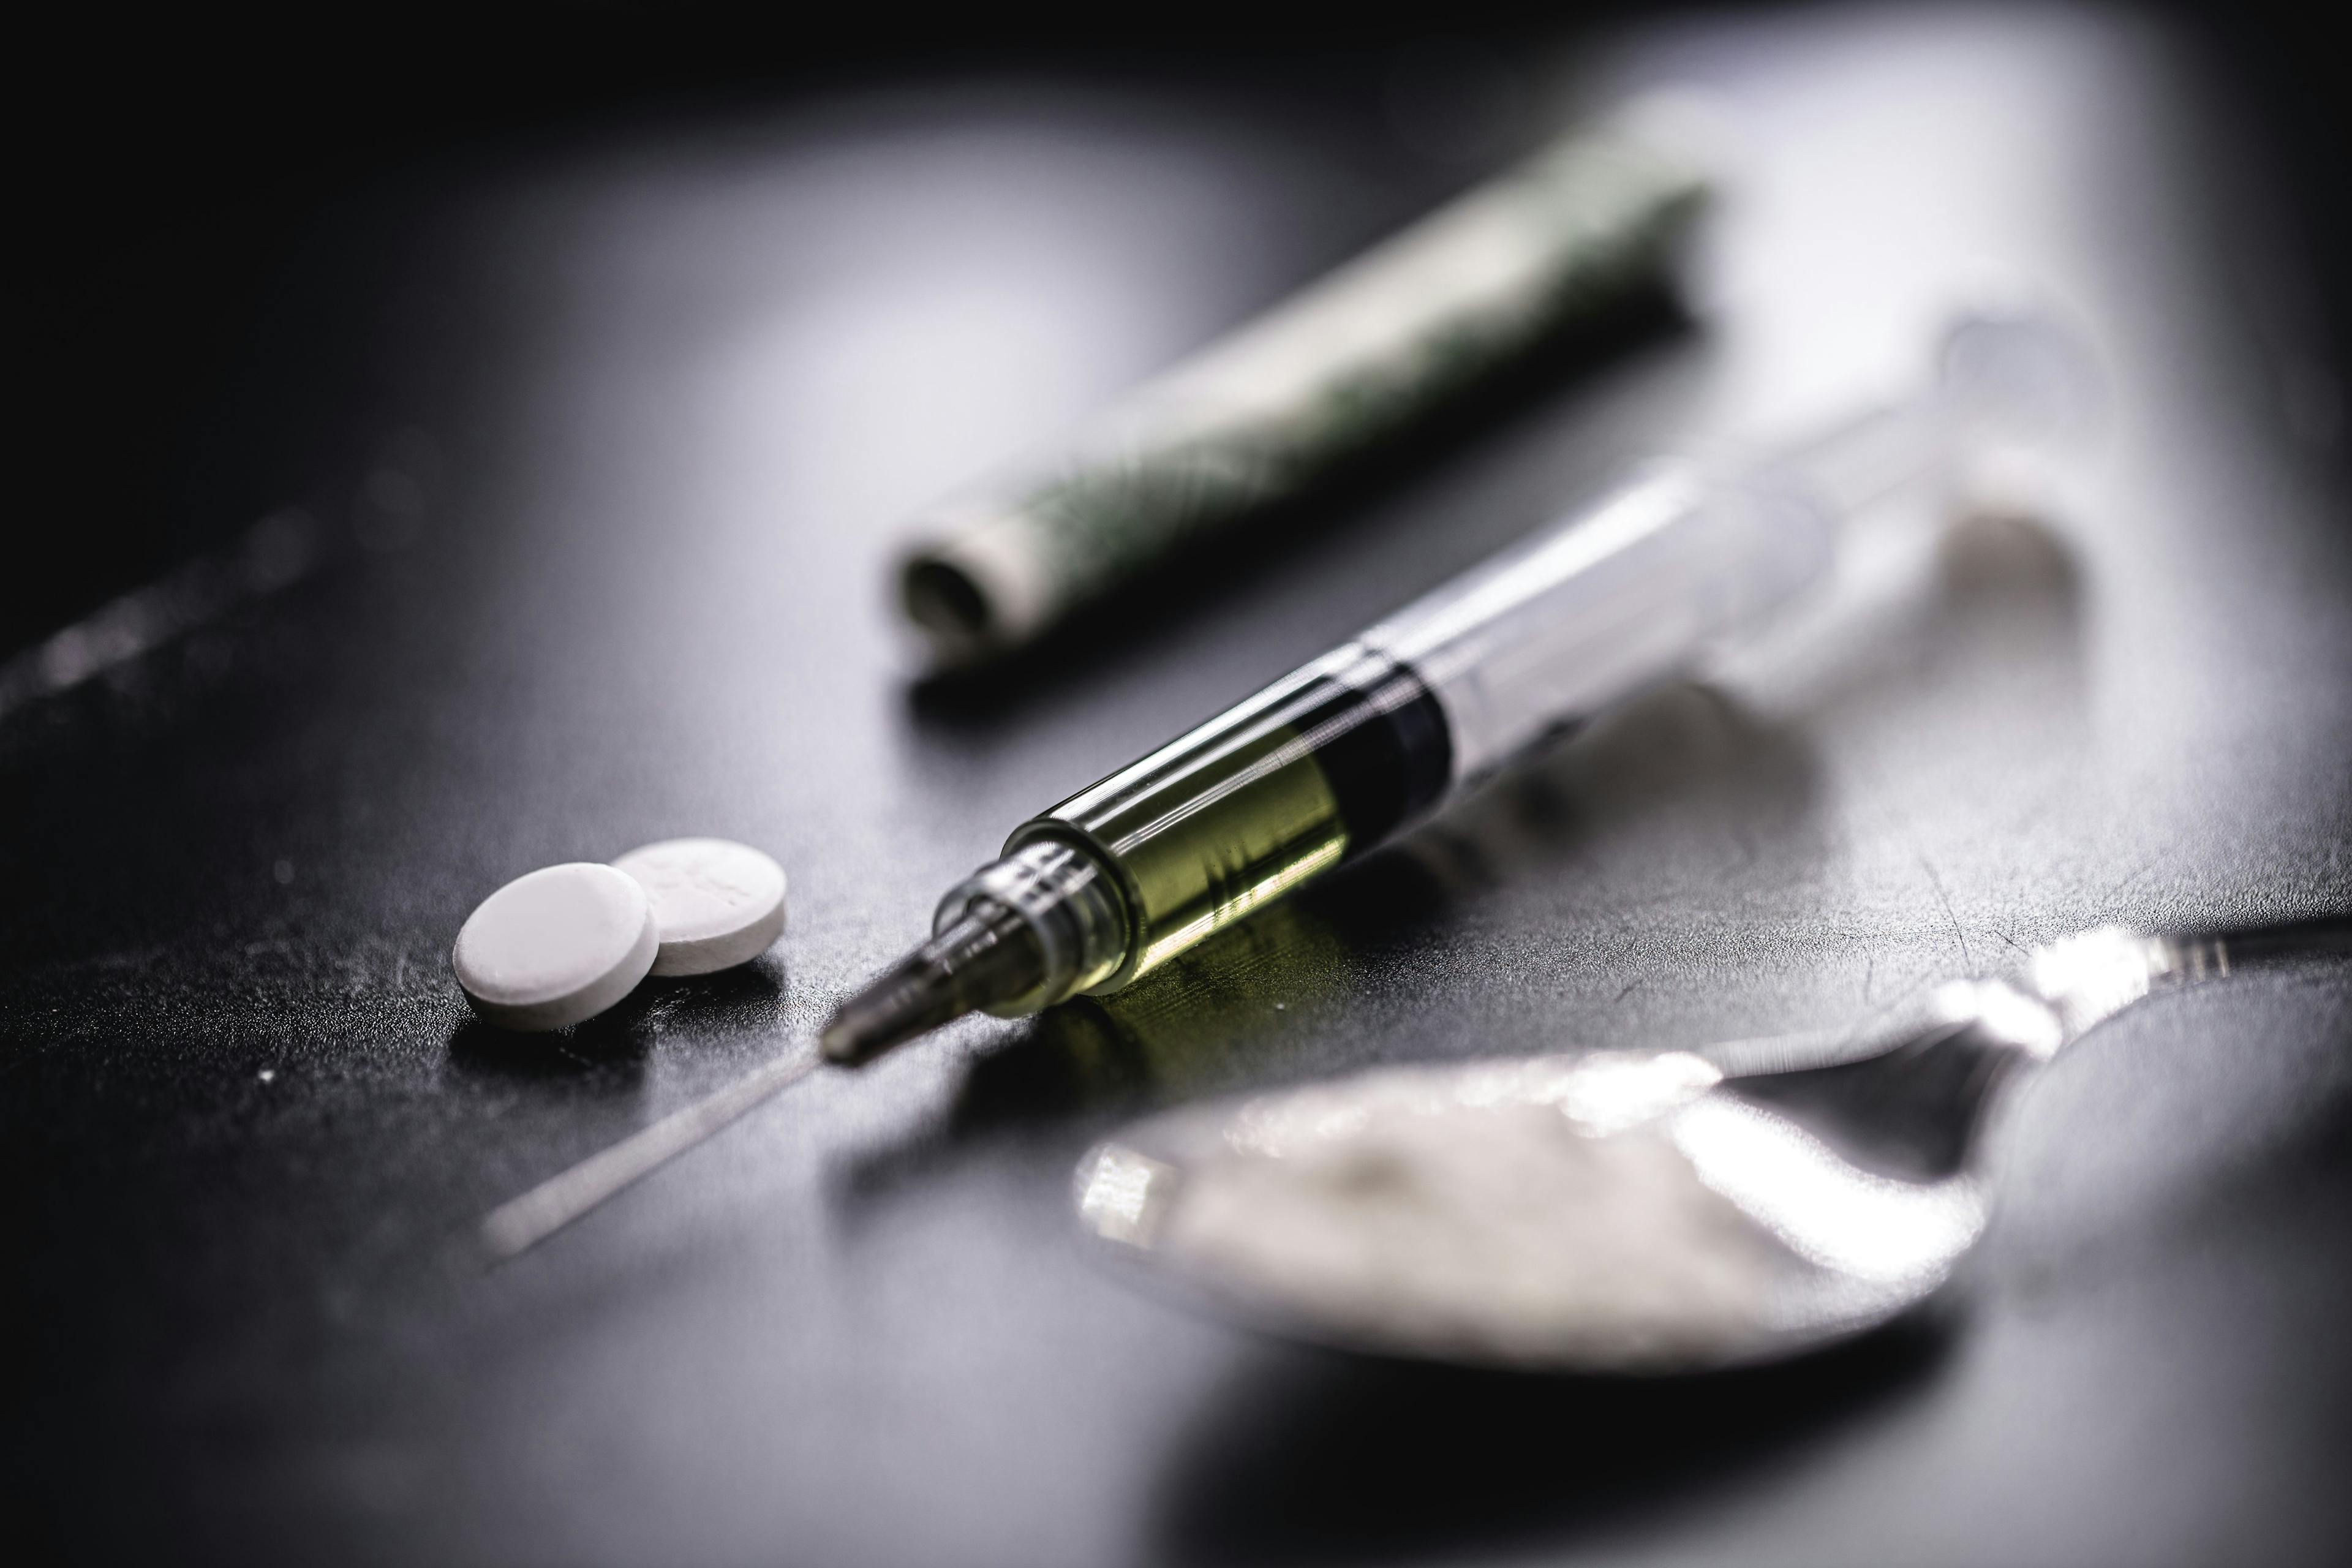 Men are more likely to die of overdoses, but it's not clear why that's the case